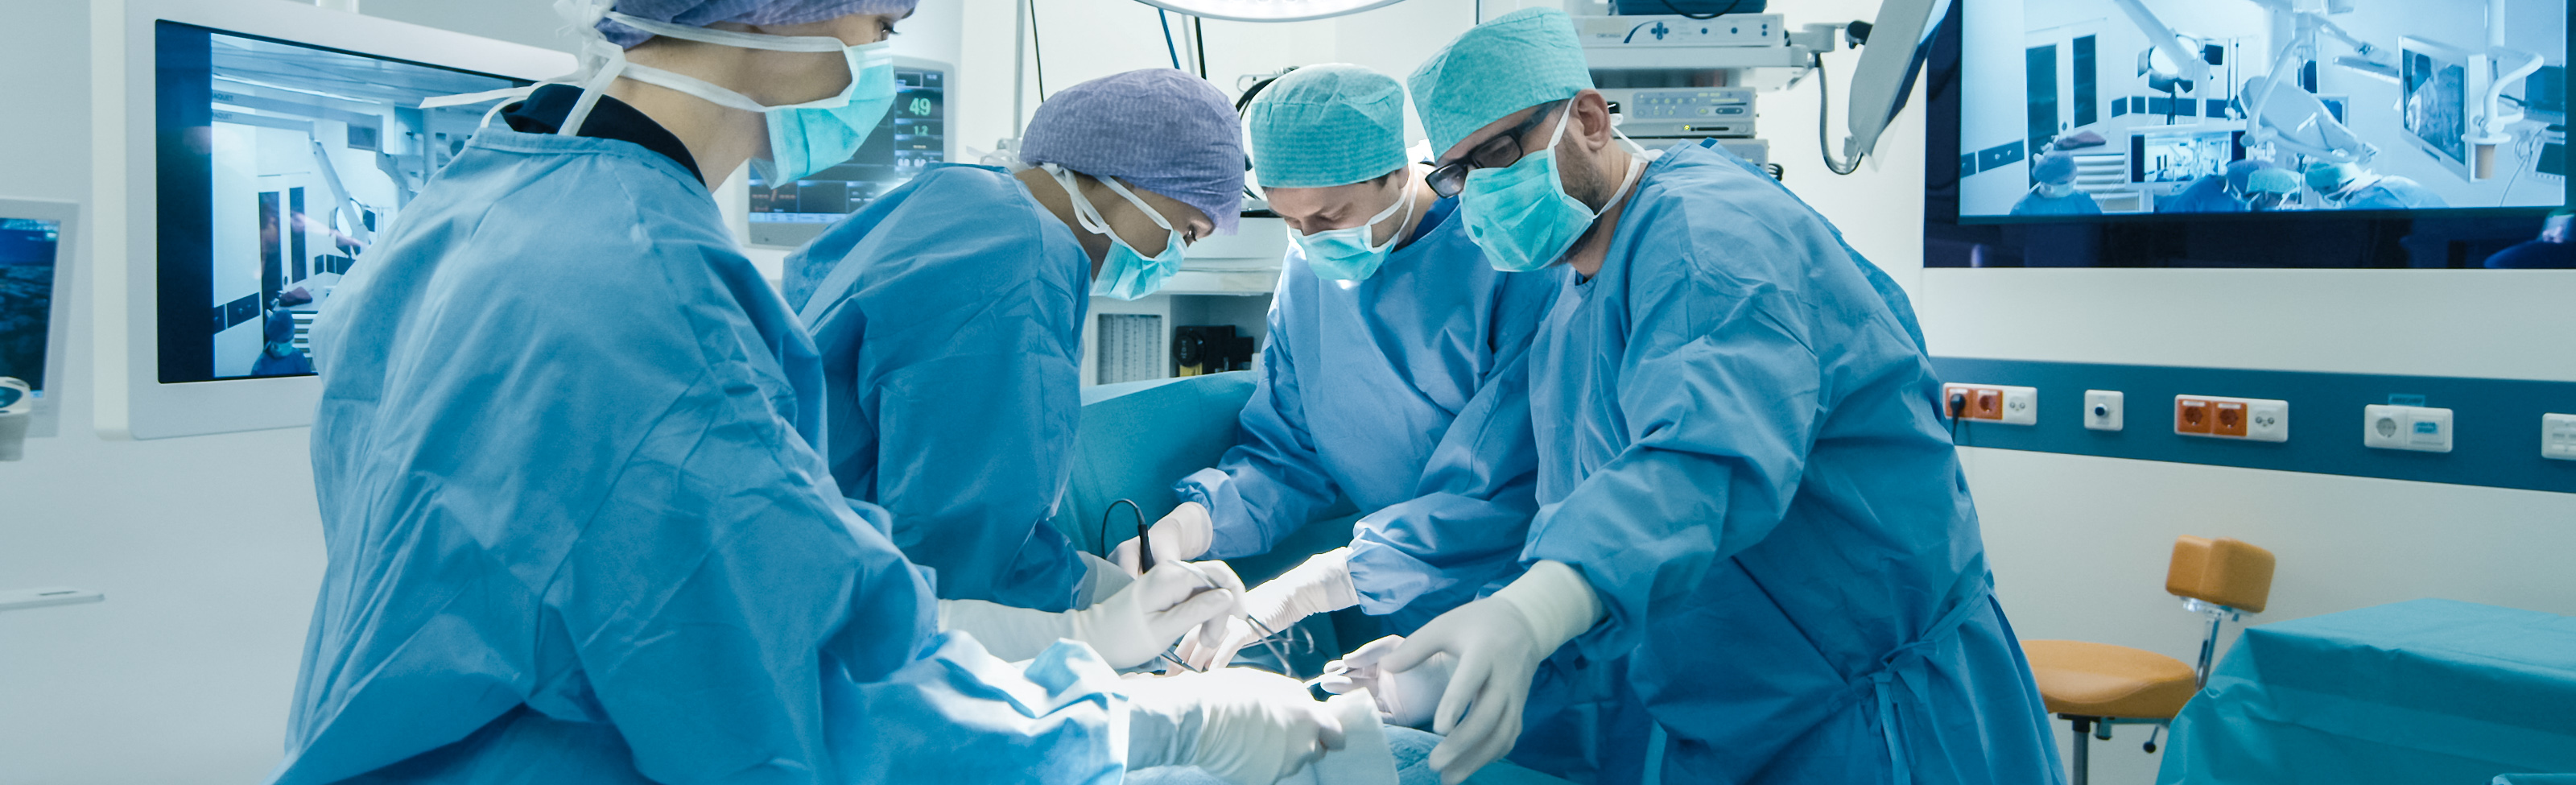 Four clinicians in blue surgical gowns in an operating room